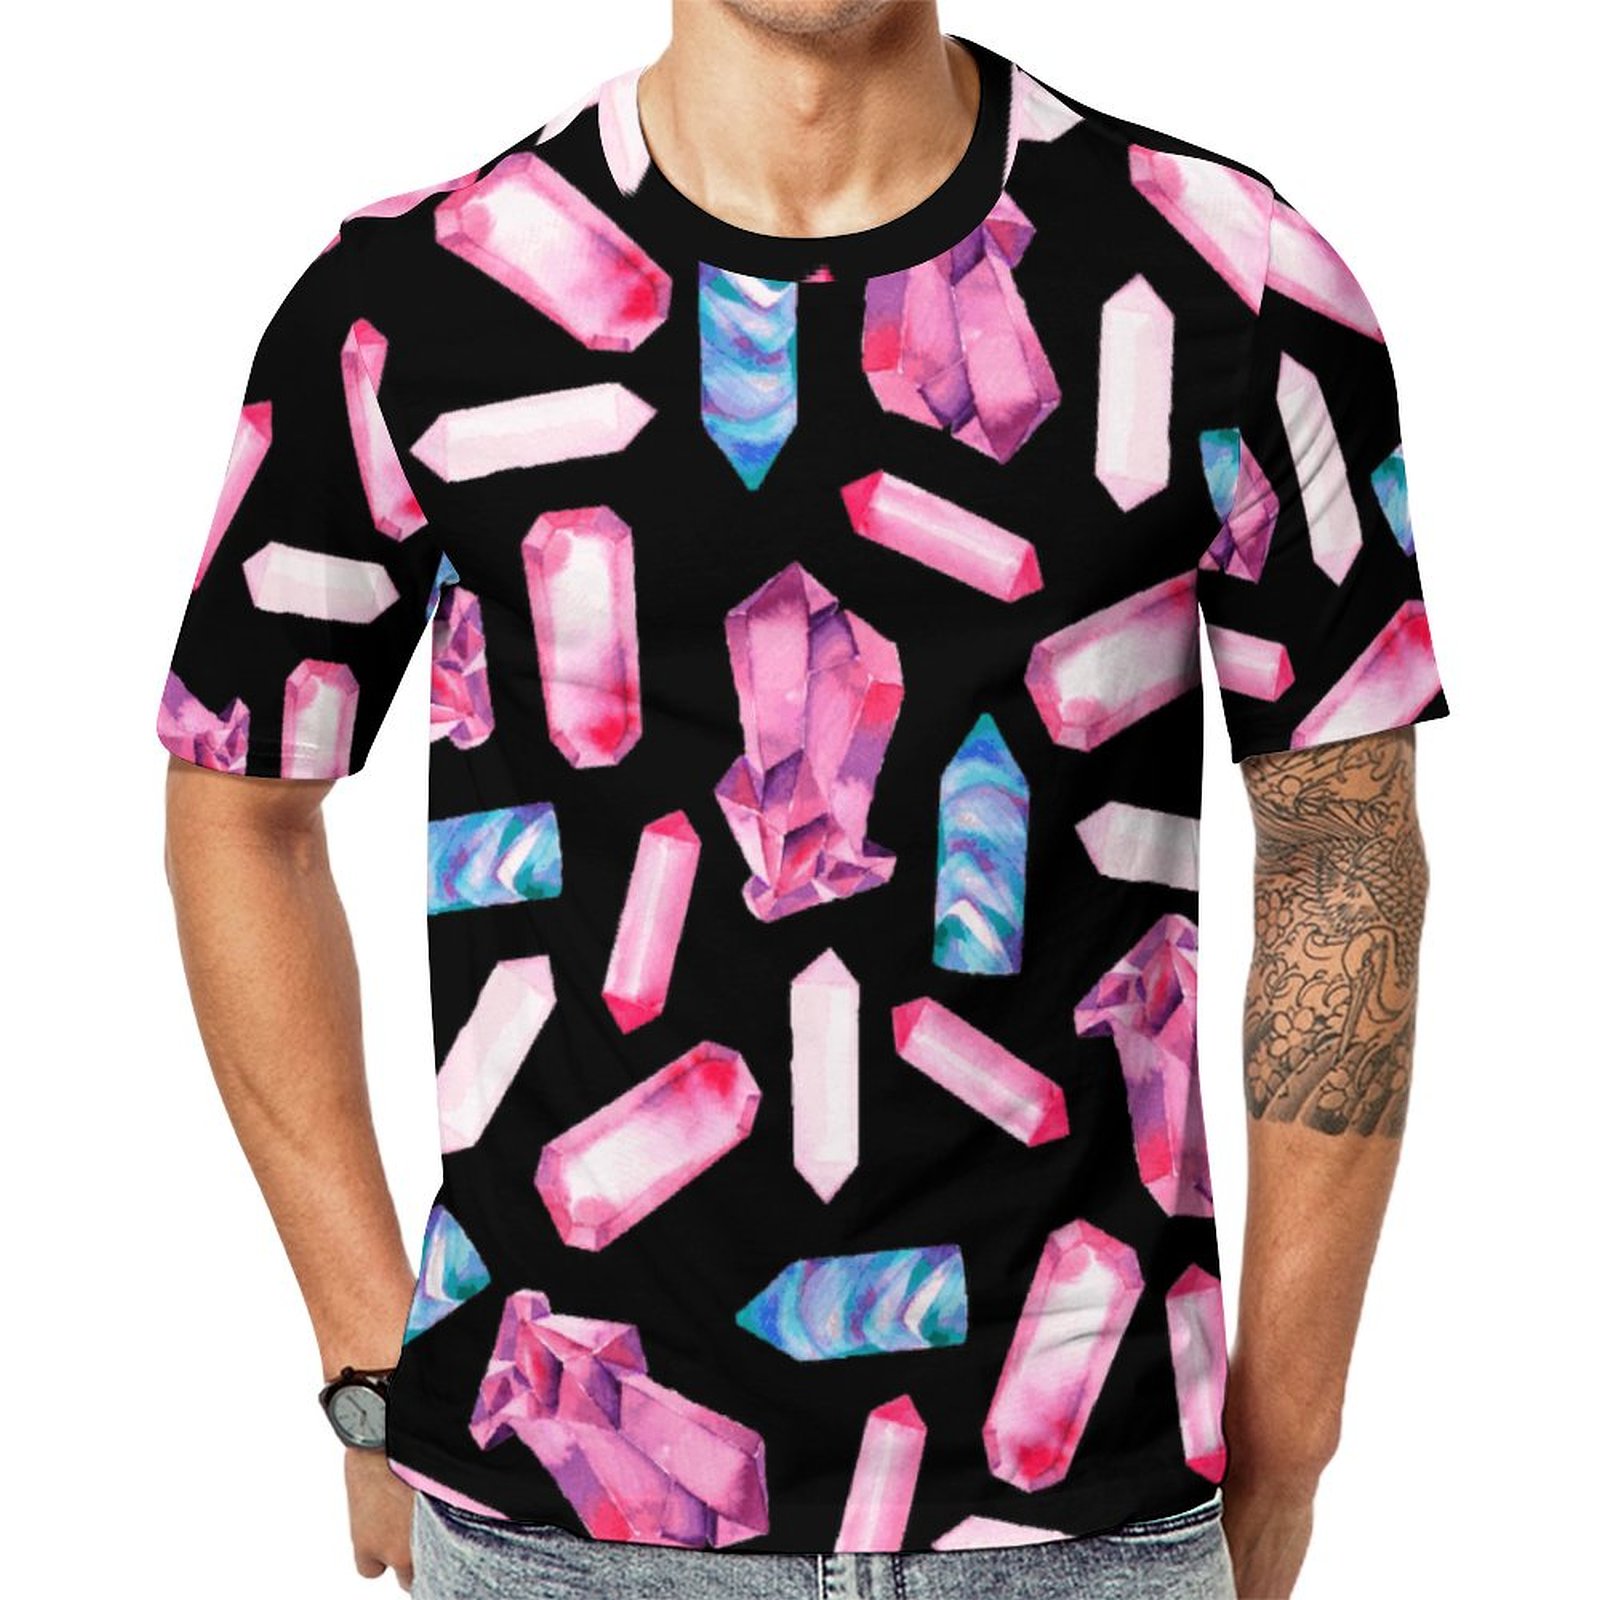 Geometrical Pink Teal Watercolor Crystals Short Sleeve Print Unisex Tshirt Summer Casual Tees for Men and Women Coolcoshirts